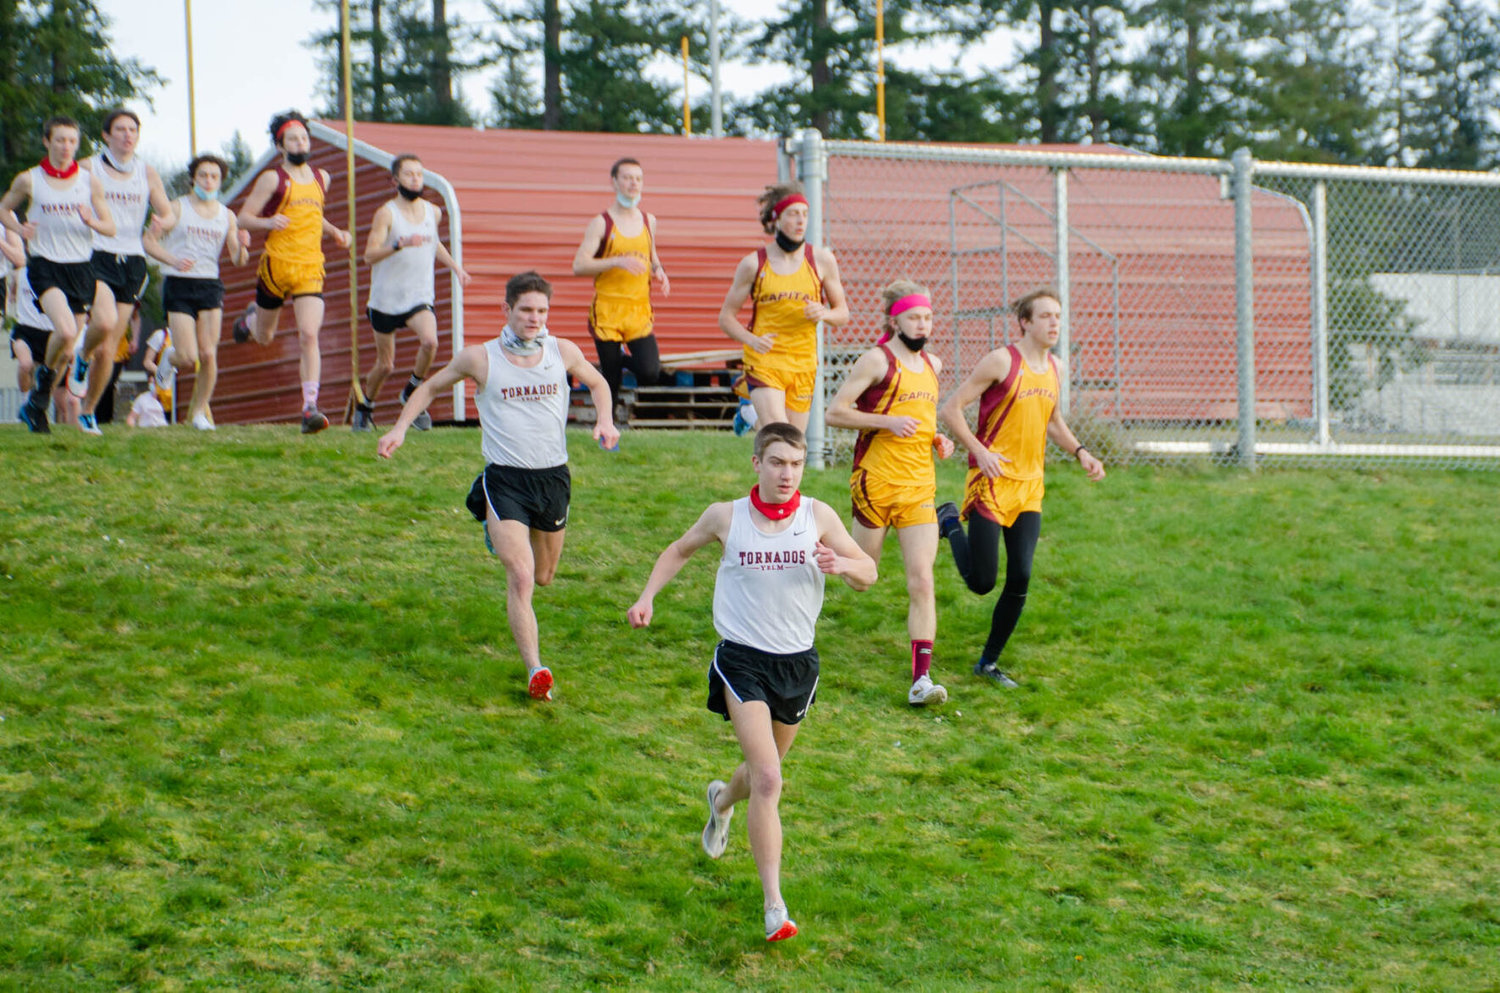 The Yelm Tornados and Capital Cougars rush off following the start of a 2.1-mile  meet on Wednesday afternoon. Athletes were required to wear face coverings before and after the race, per recent WIAA regulation, though were allowed to take them off for the majority of the race. 